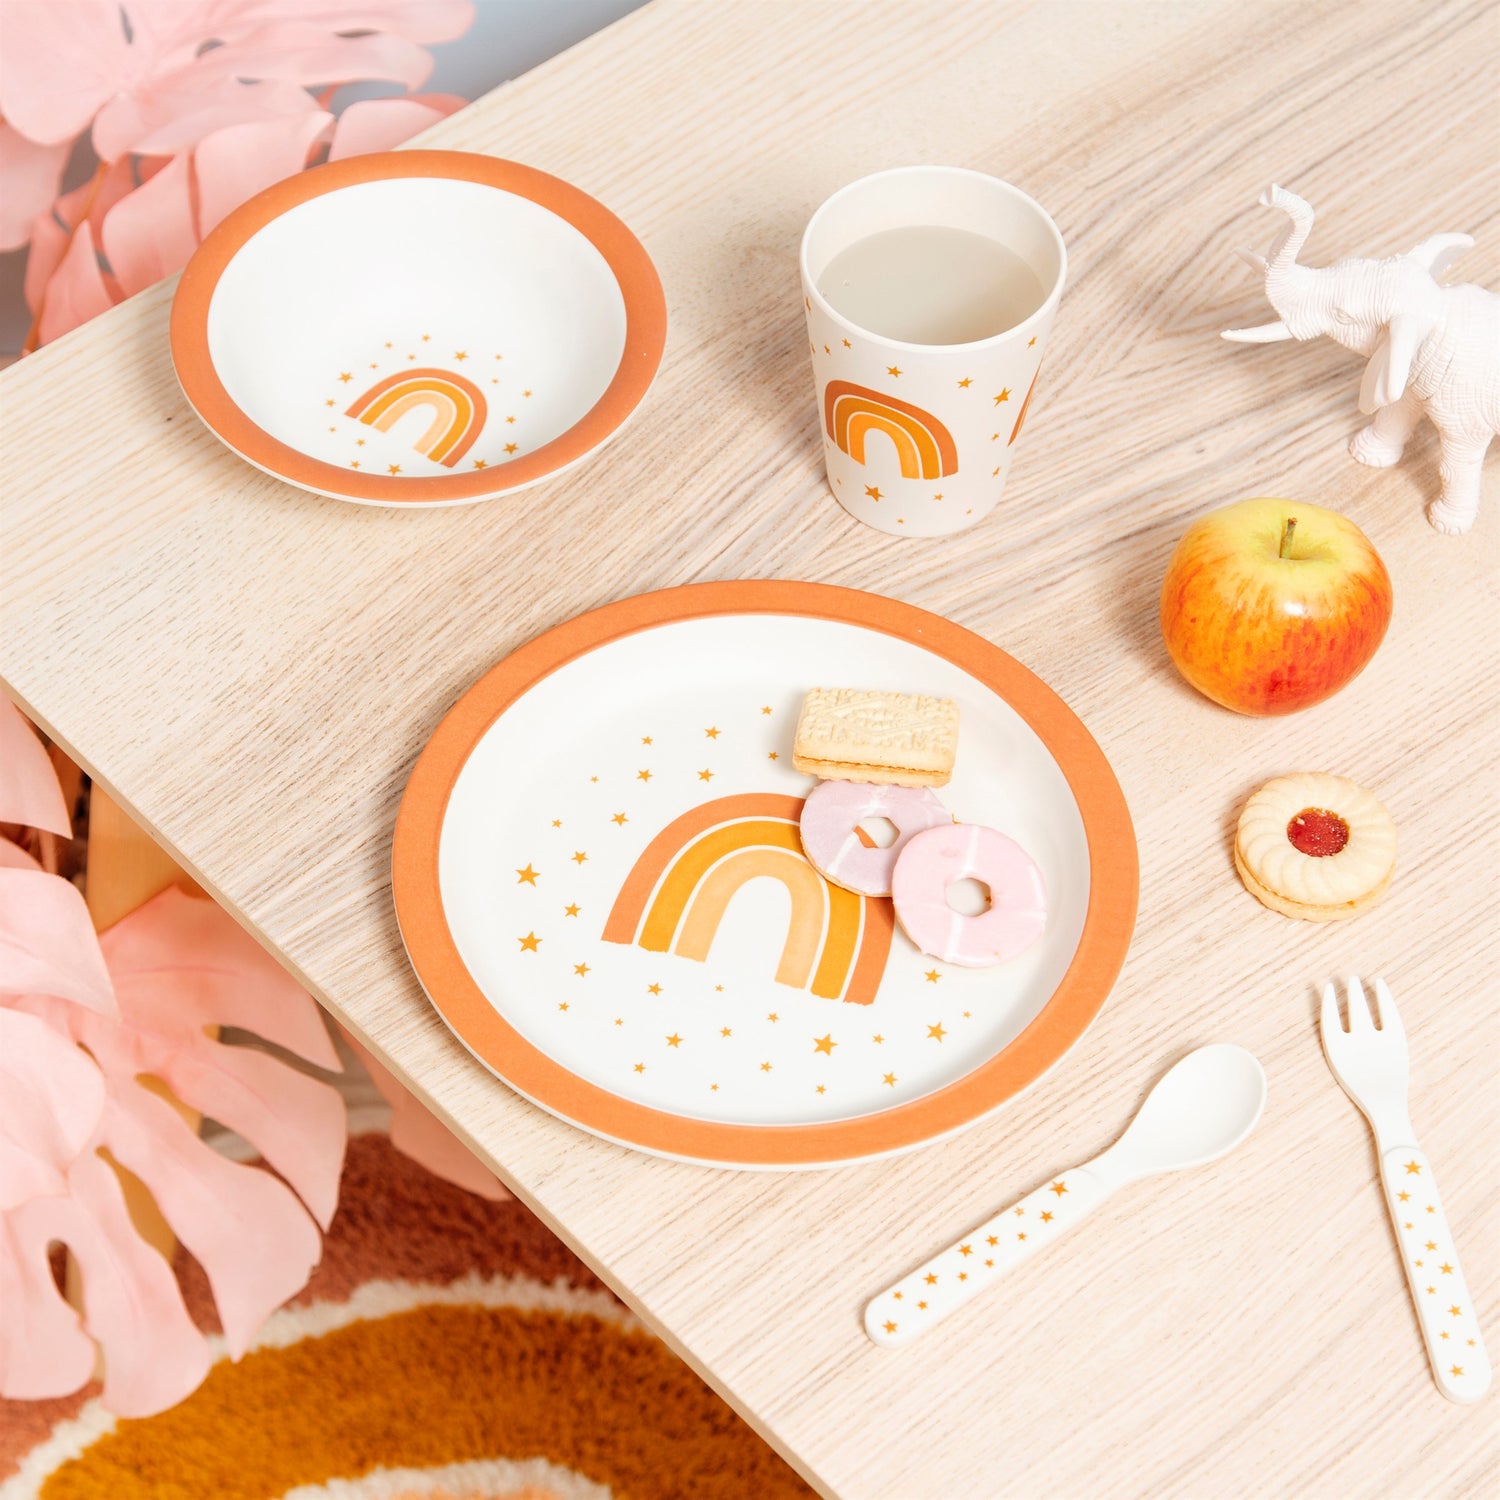 Love our planet with this bamboo tableware and cutlery set featuring an orange and pink rainbow and star design.